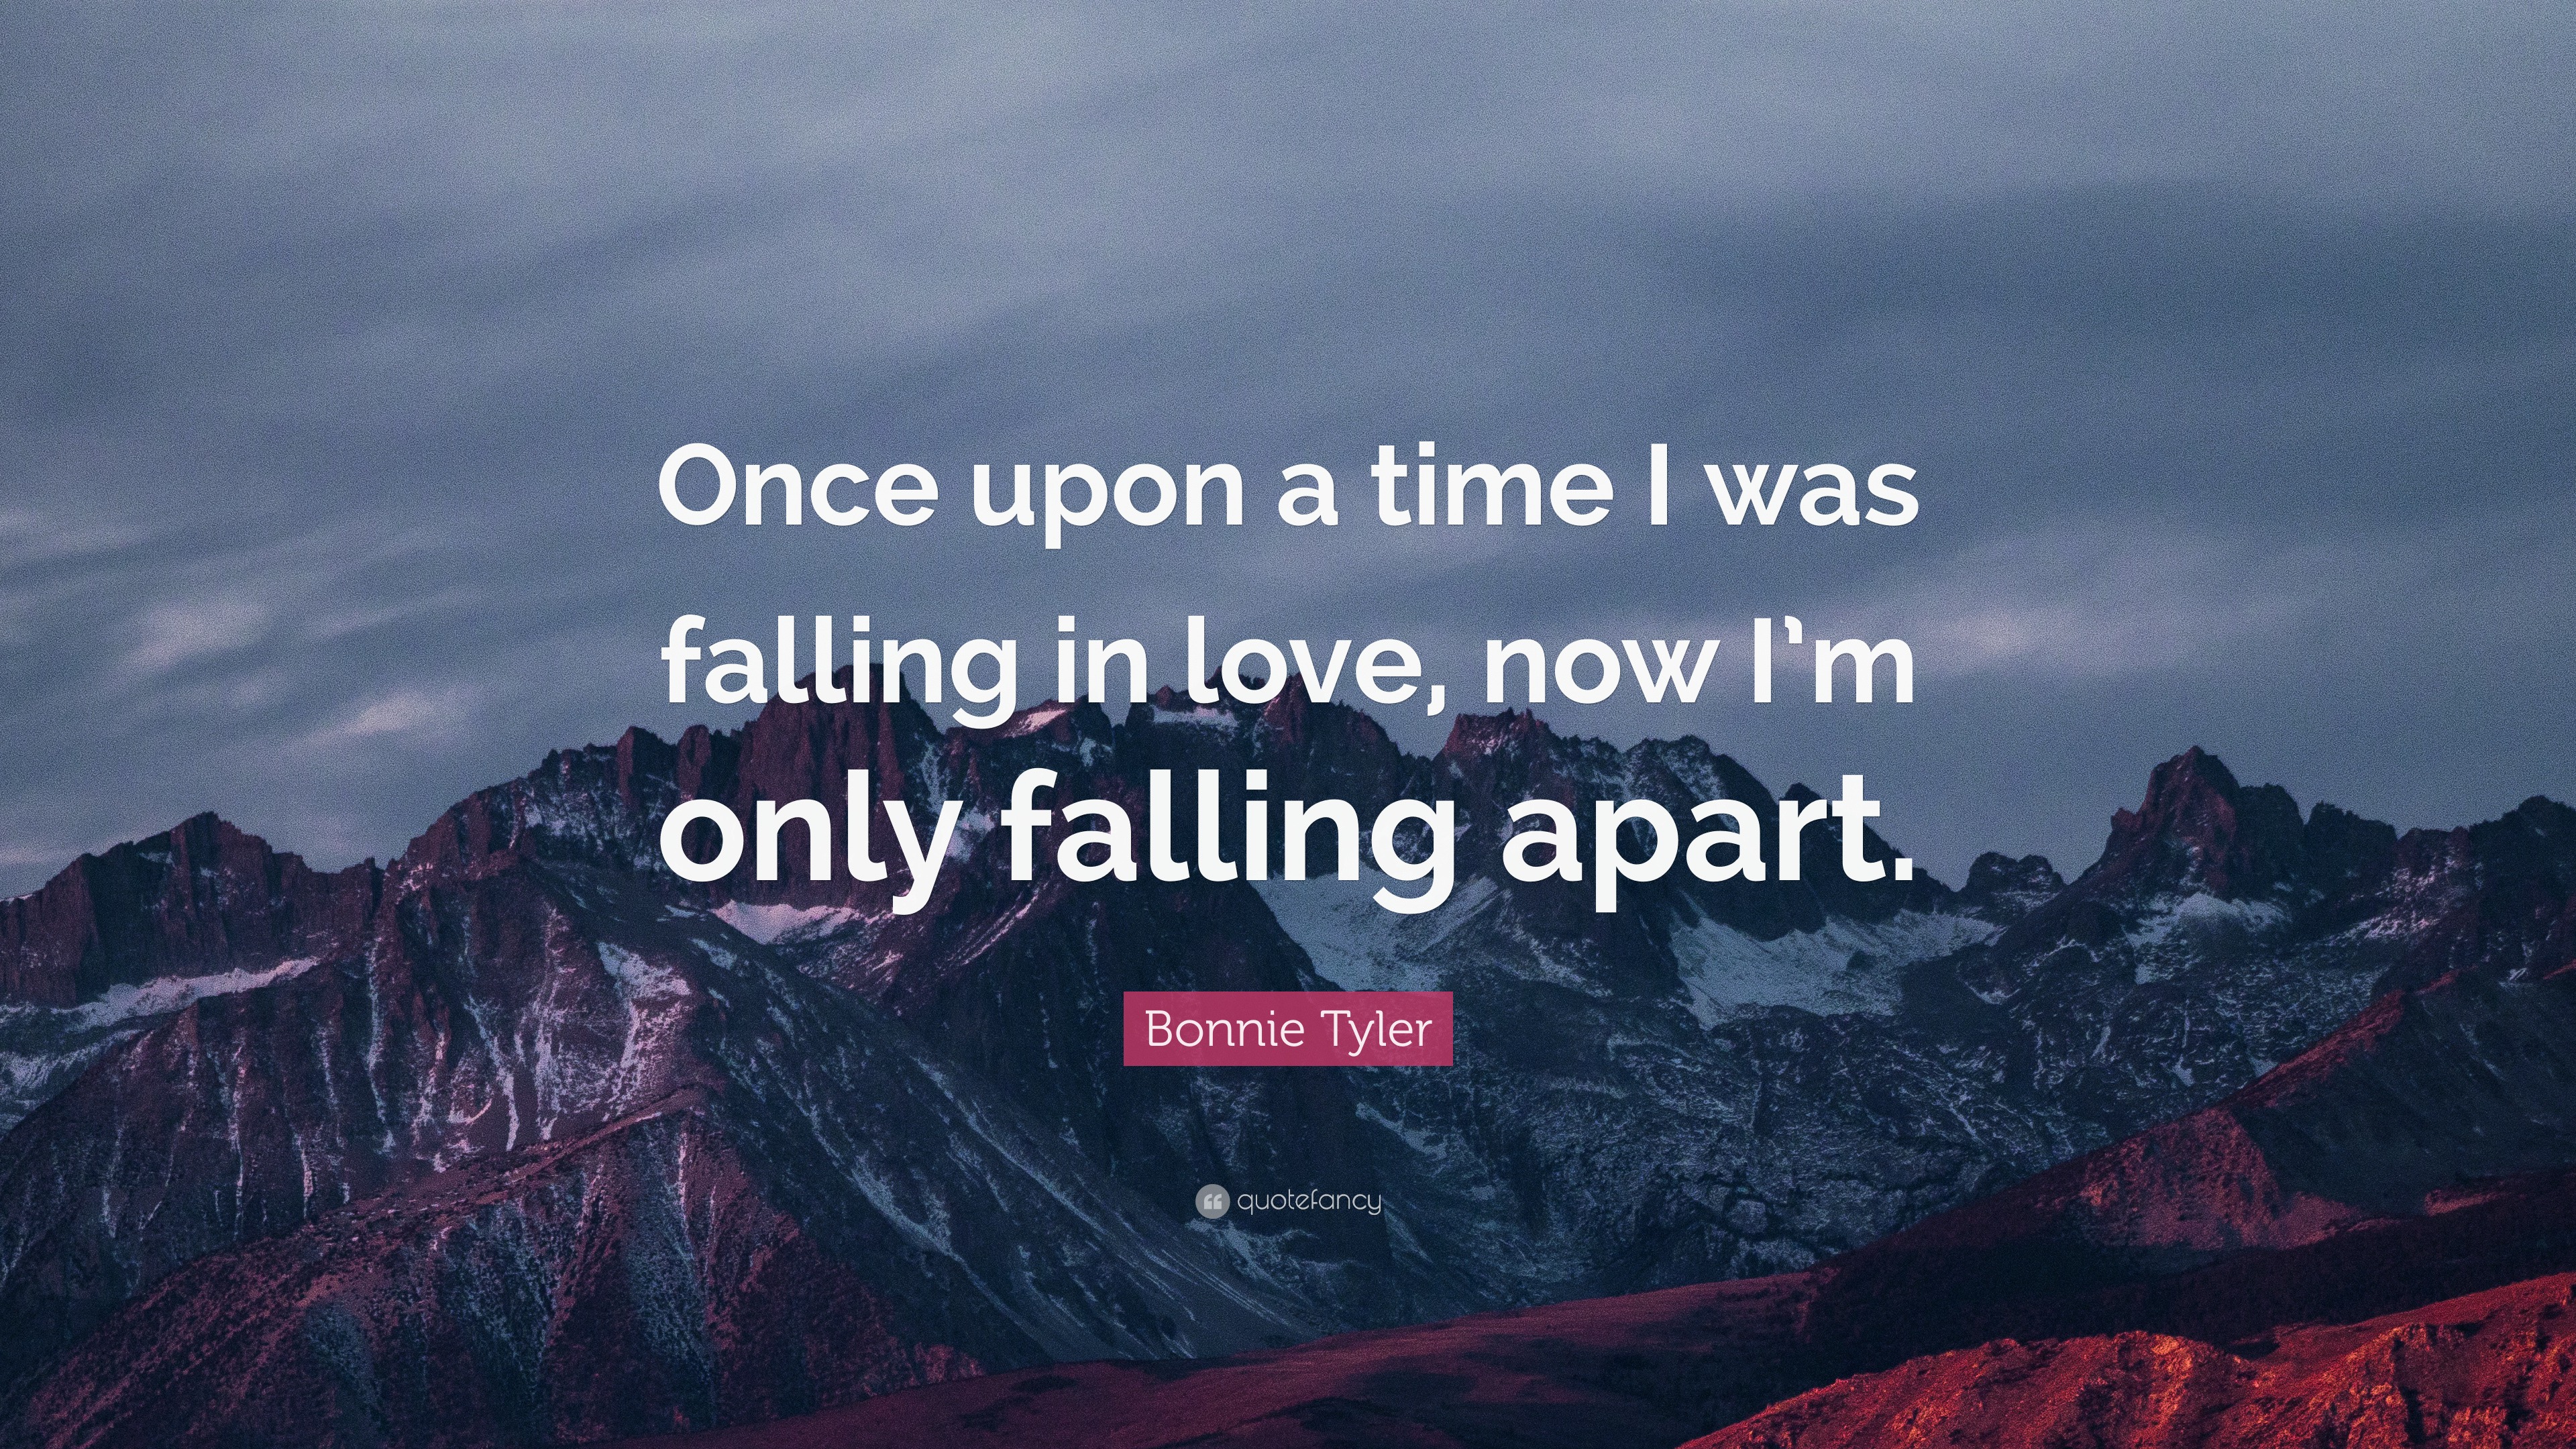 Bonnie Tyler Quote “ ce upon a time I was falling in love now